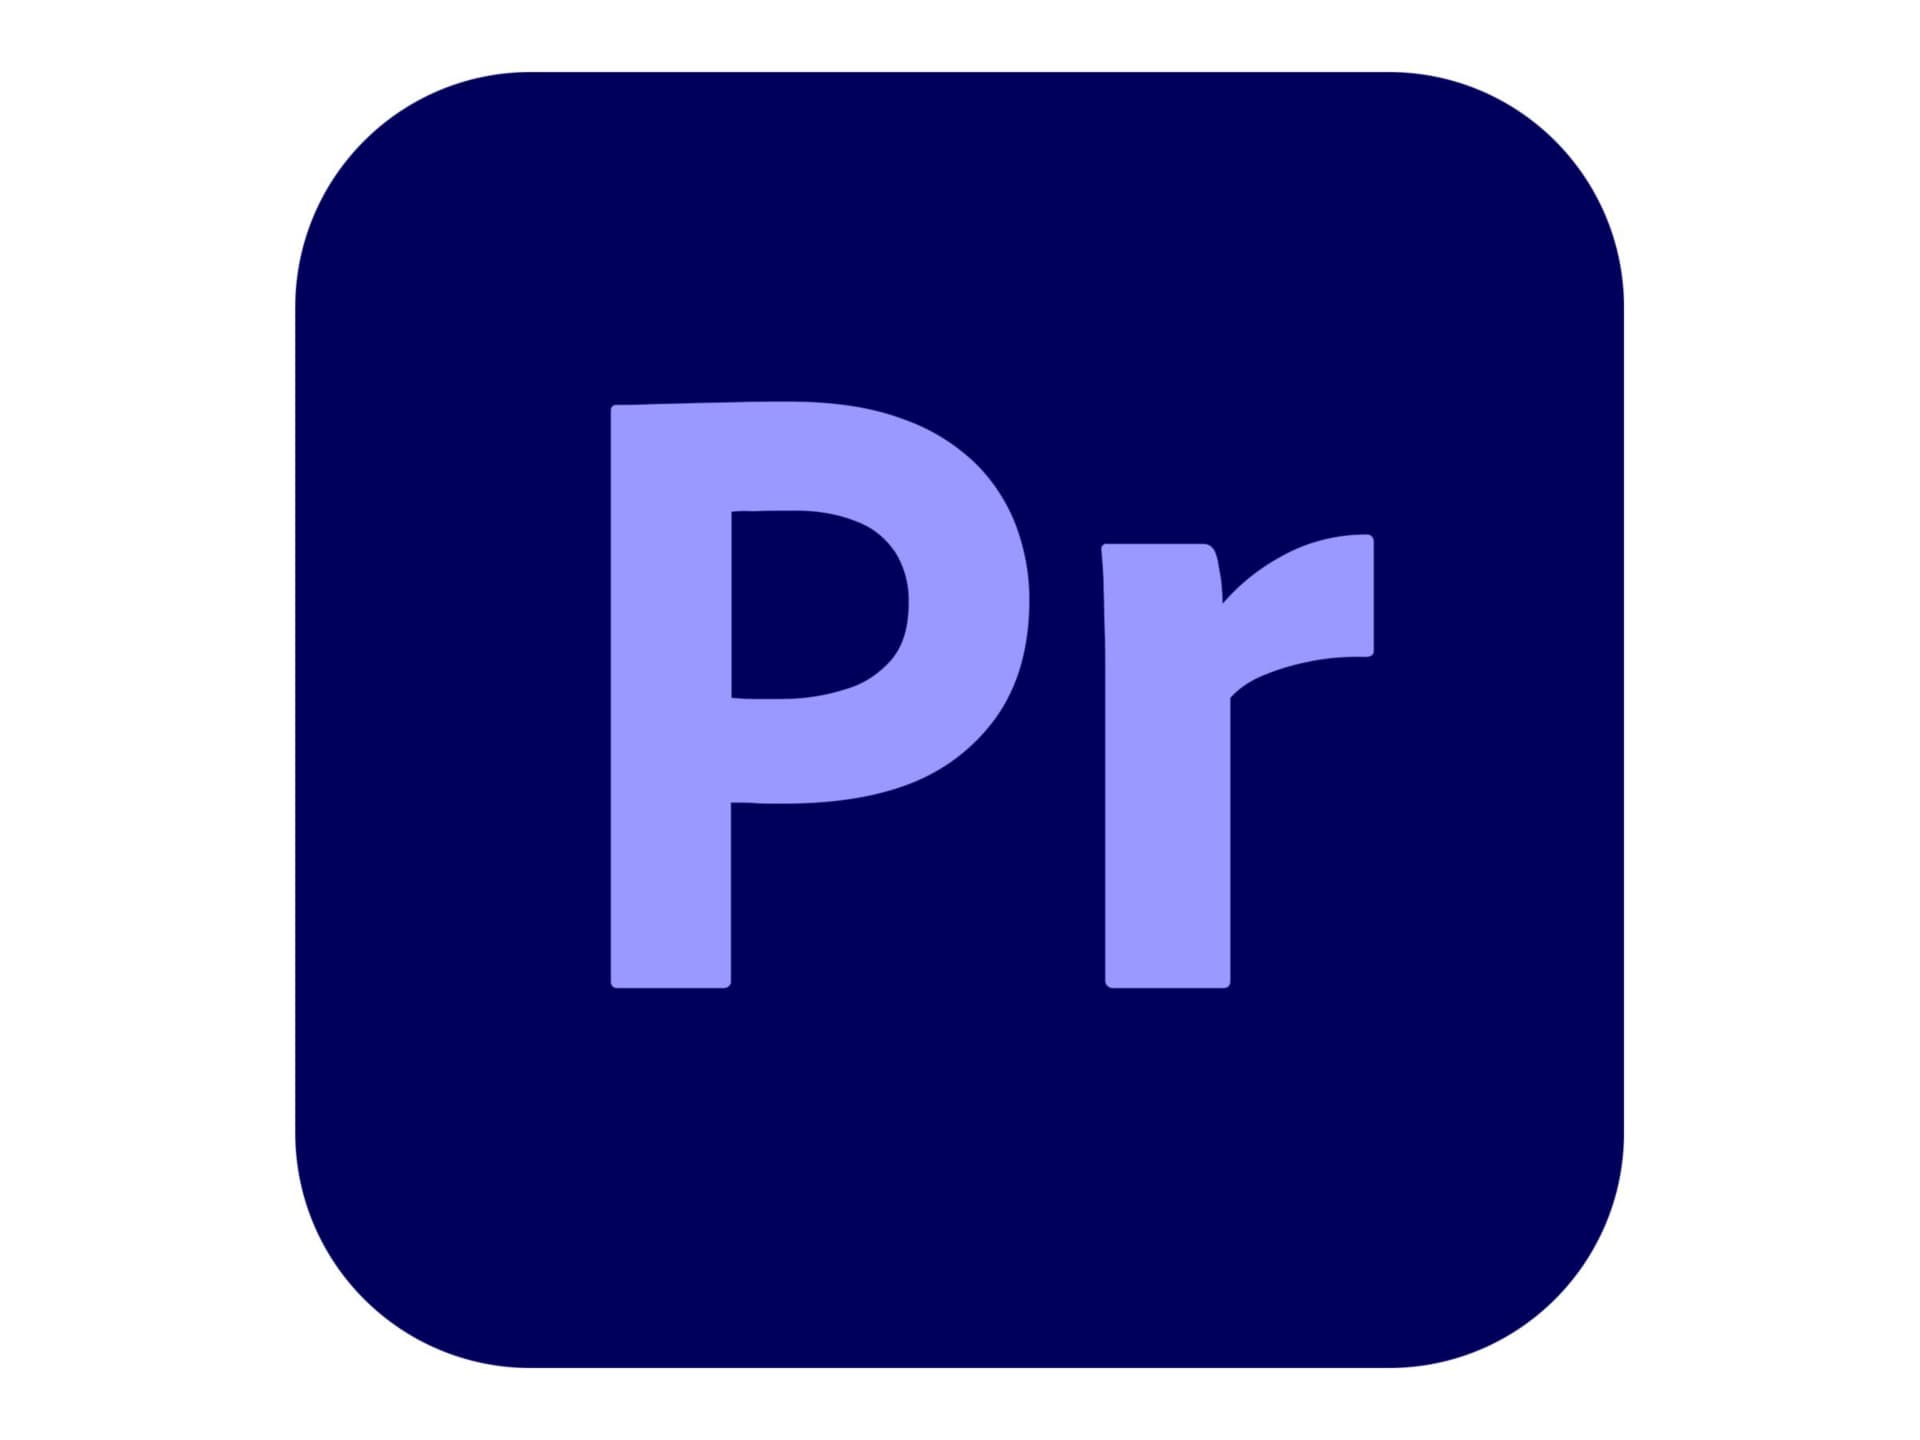 Adobe Premiere Pro CC for teams - Subscription New (9 months) - 1 named user